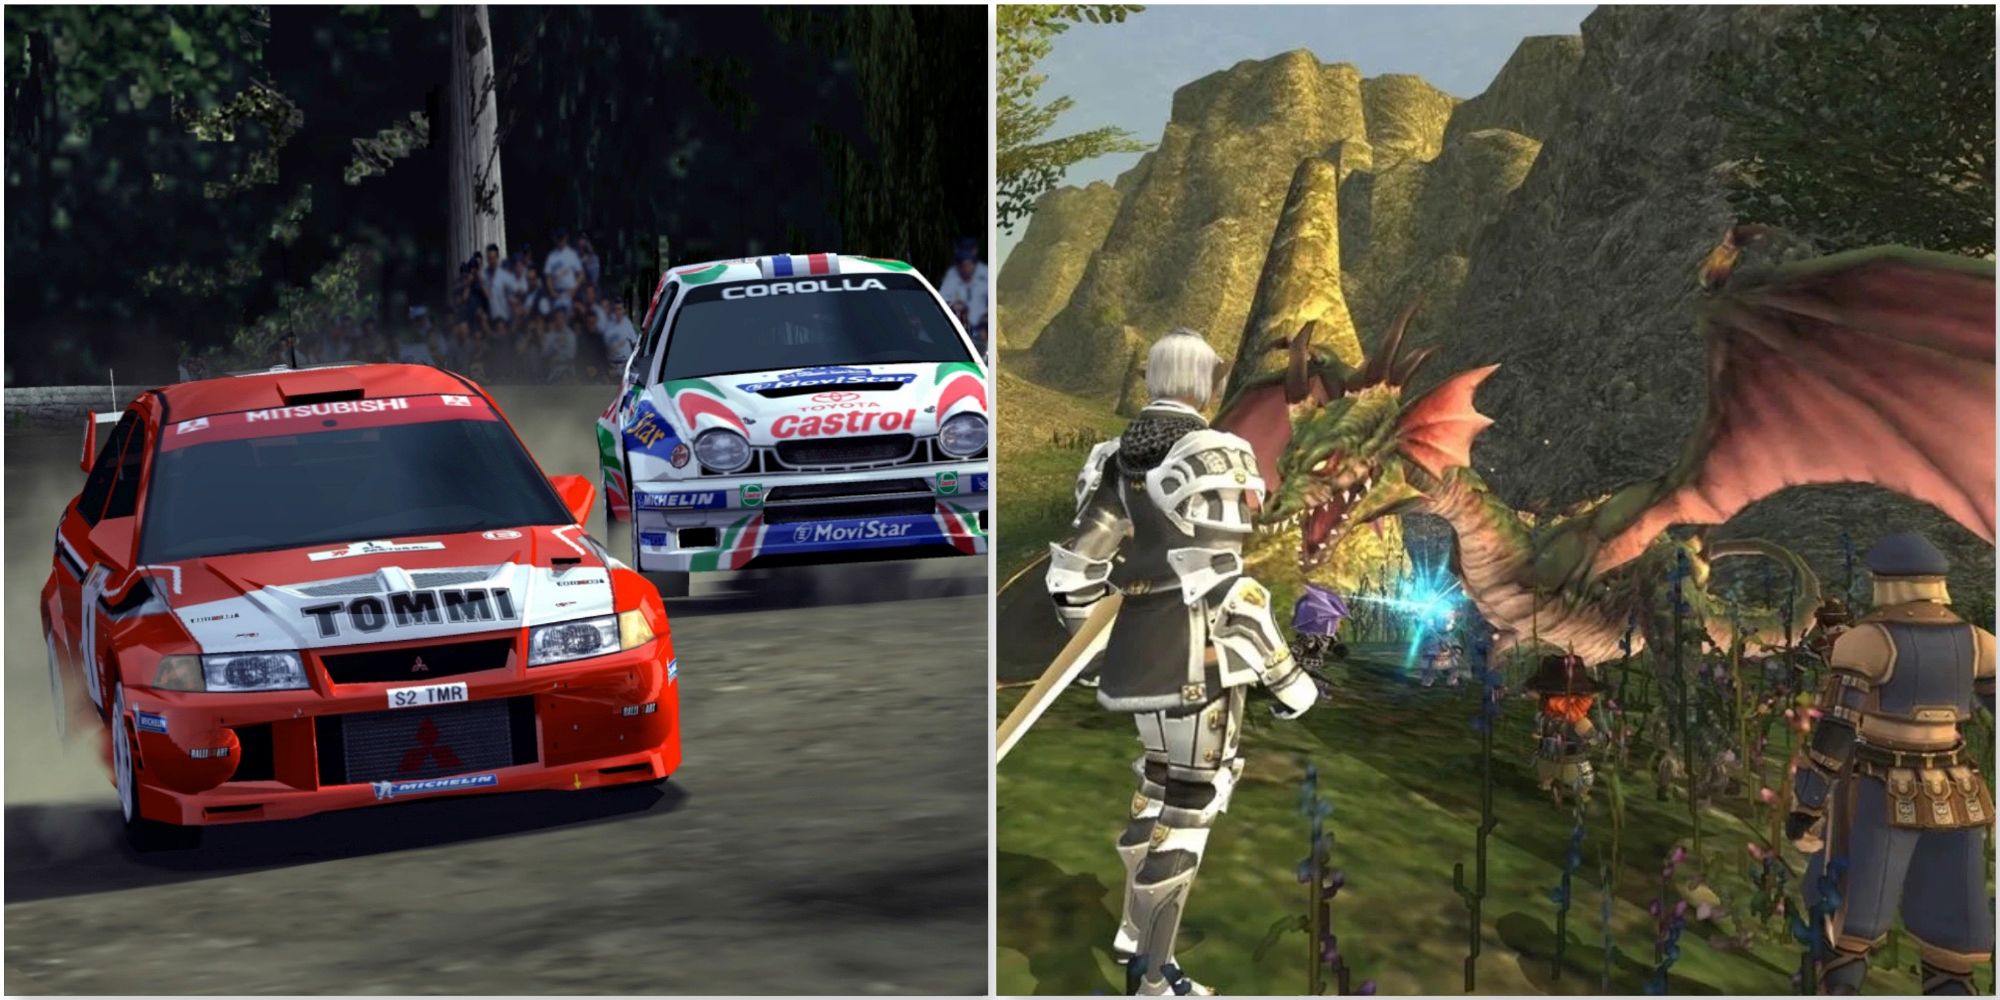 Racing in a match in Gran Turismo 3 A-Spec and Fighting enemies in Final Fantasy 11